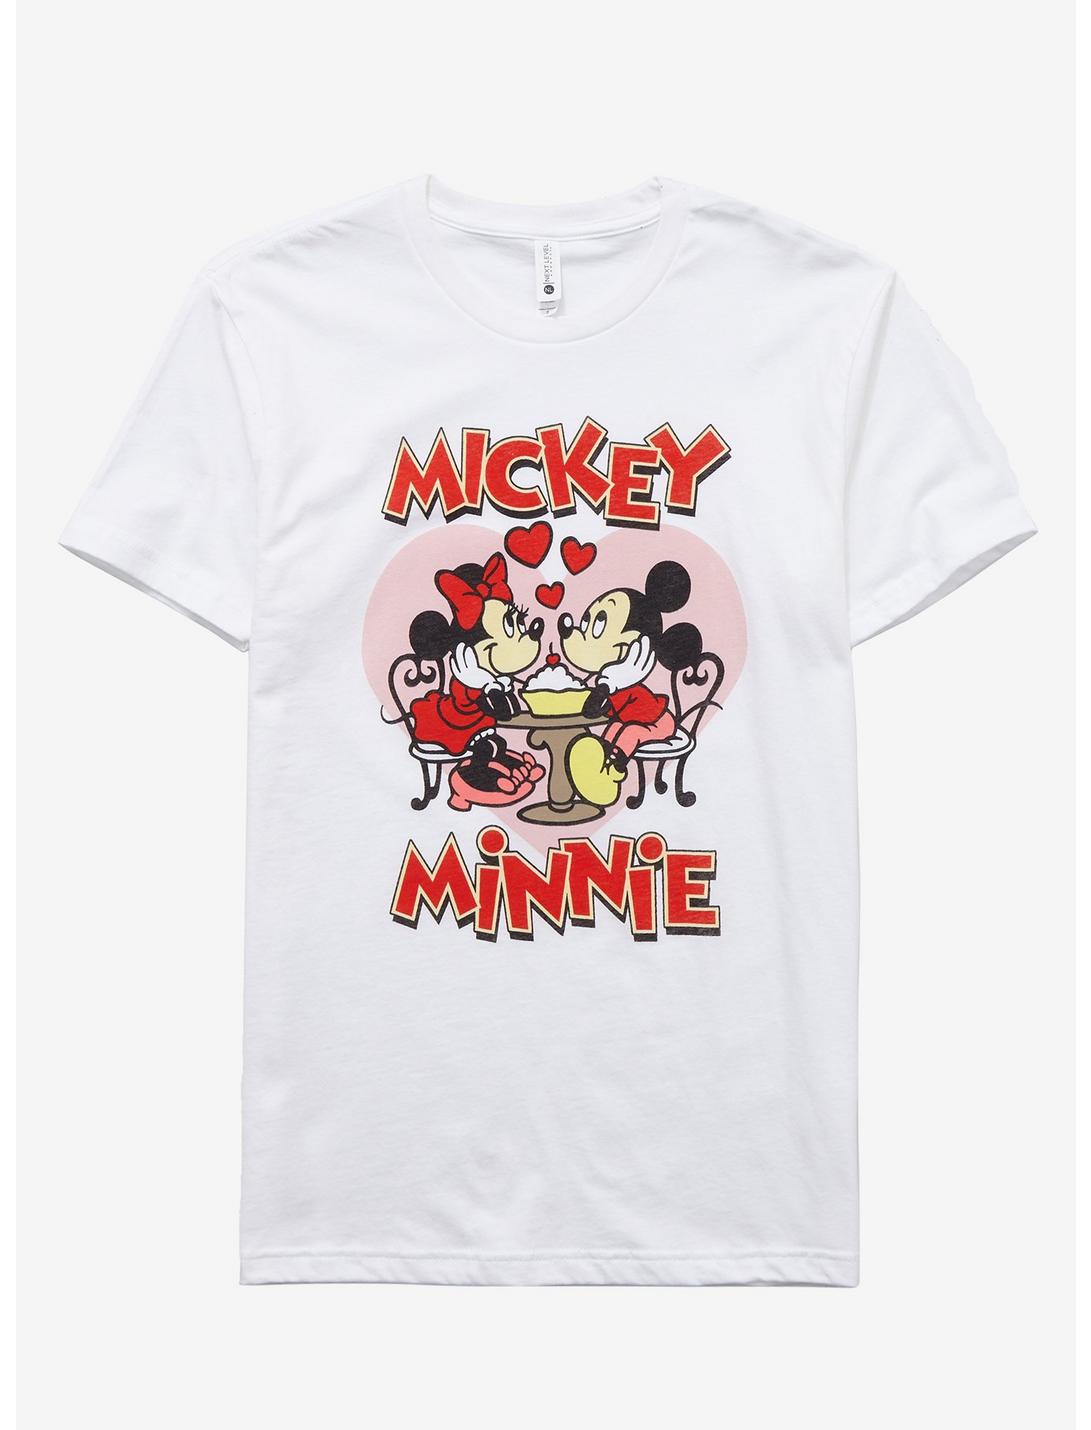 Disney Mickey Mouse & Minnie Mouse Valentines  Boyfriend Fit Girls T-Shirt, MULTI, hi-res